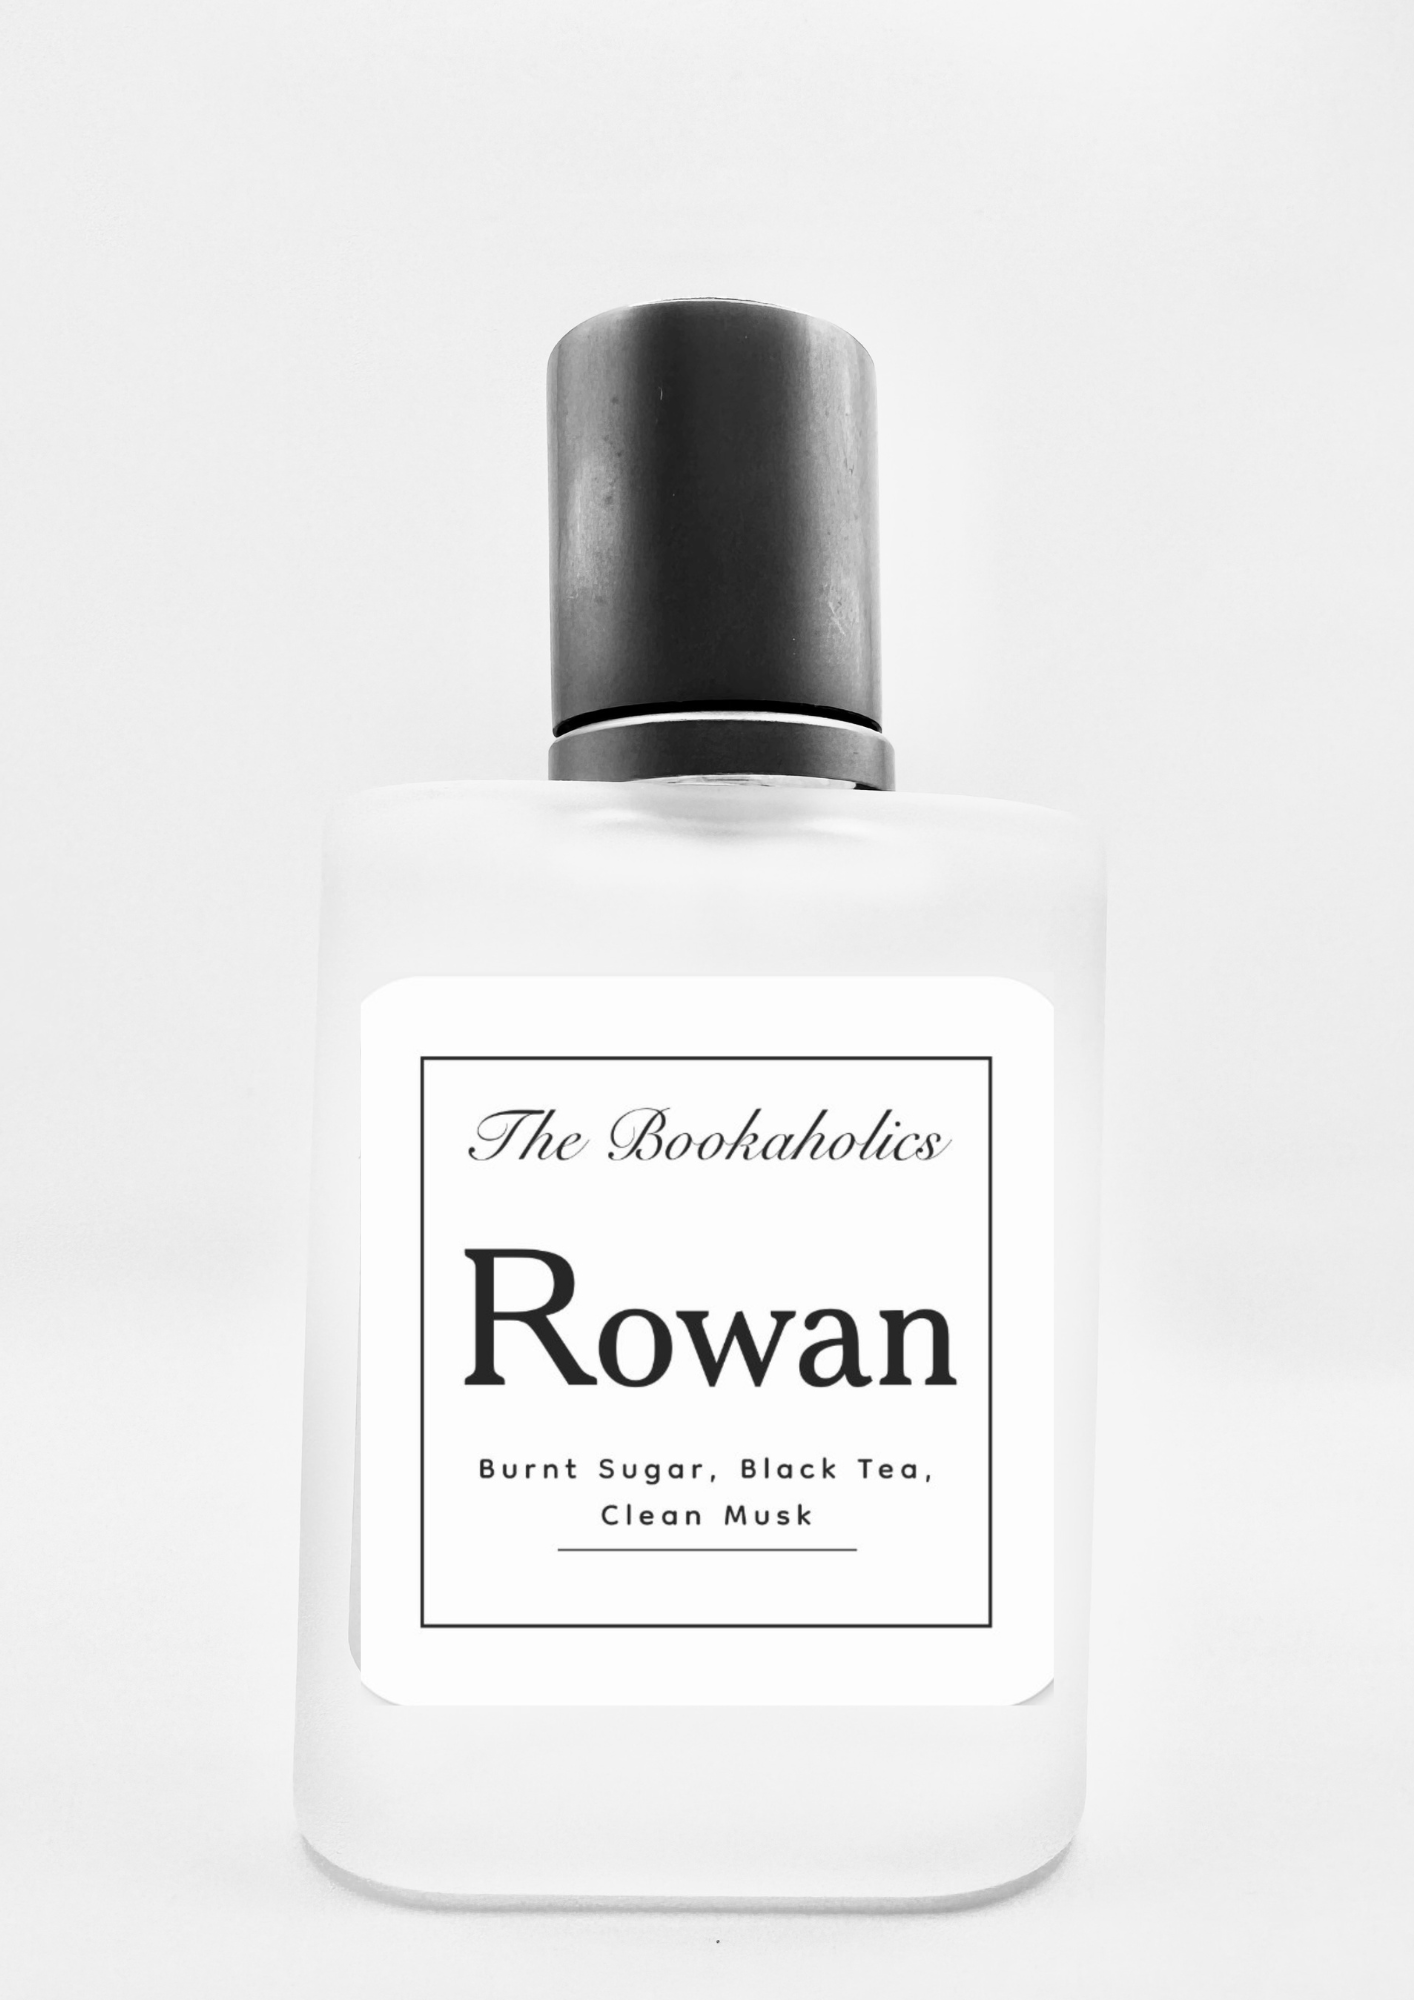 Rowan: Officially Licensed cologne inspired by Lakesedge